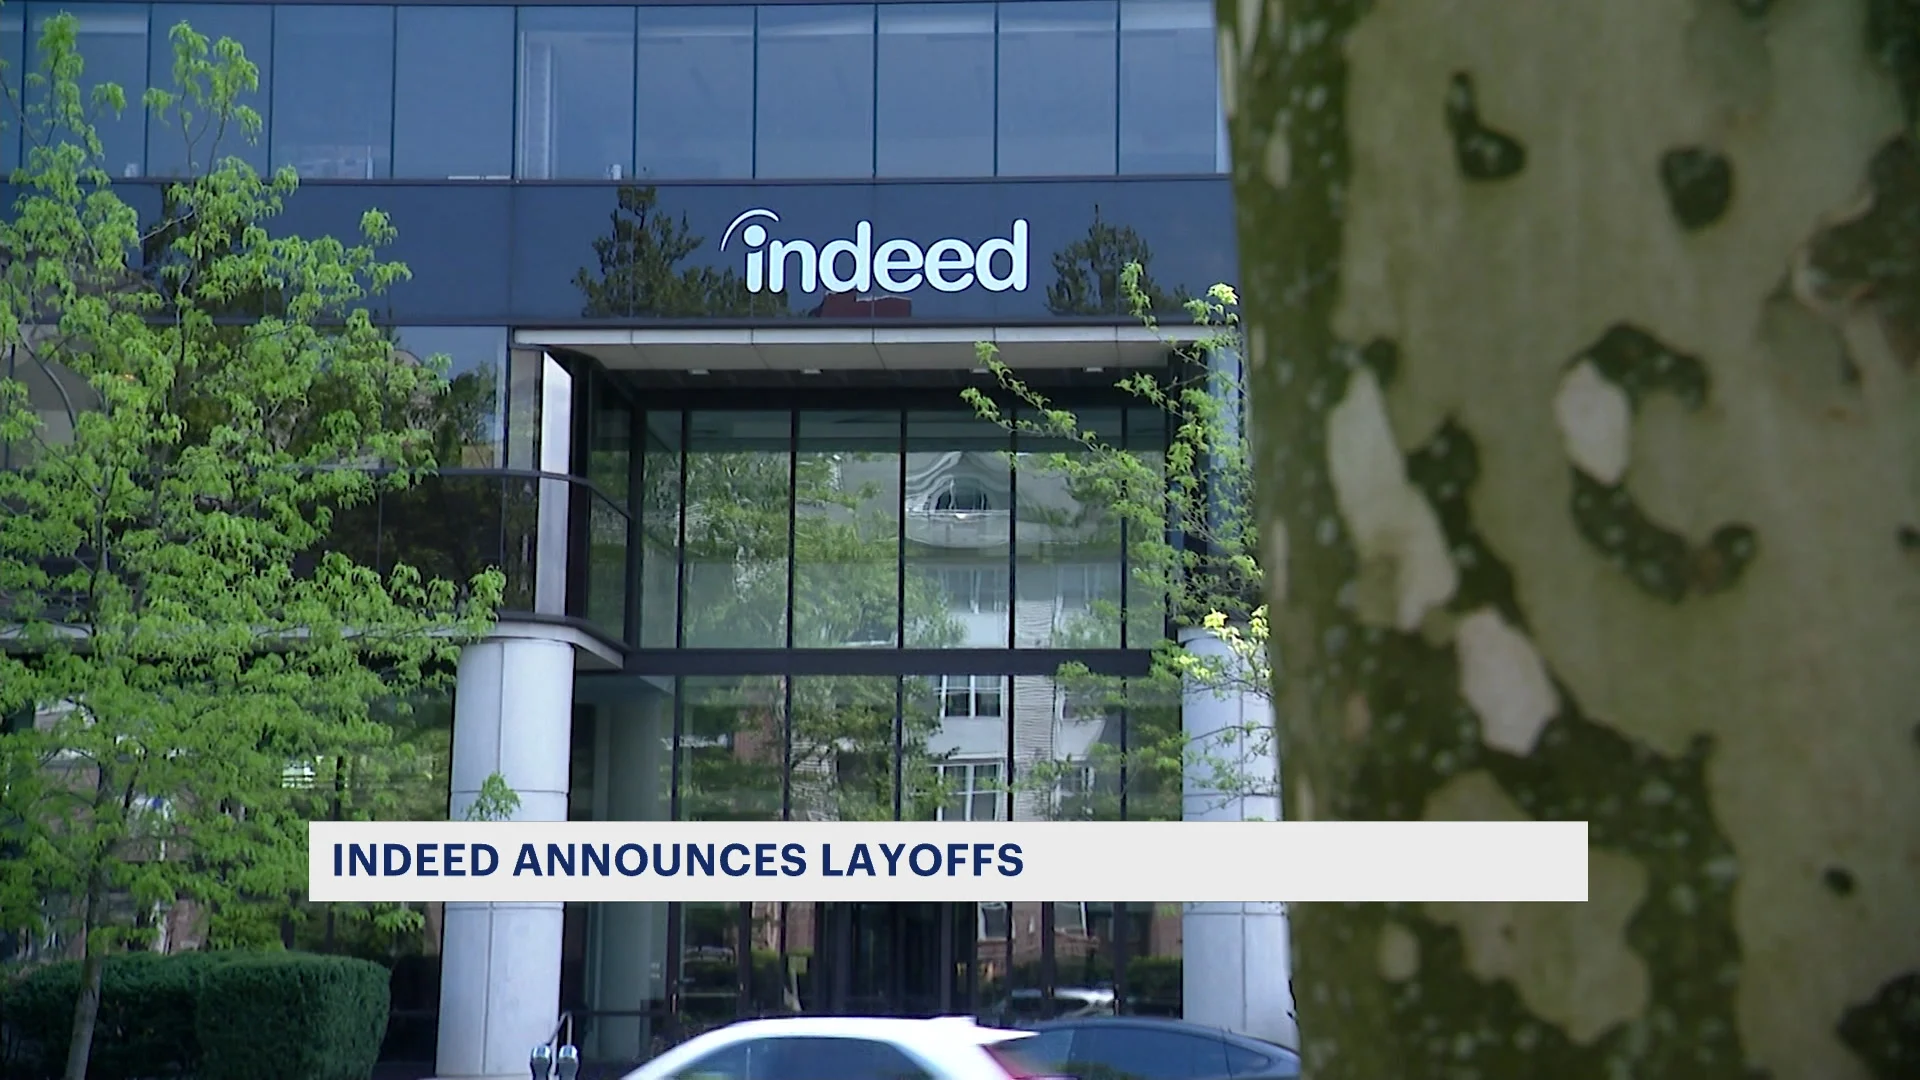 Indeed announces layoffs of 8% of its employees